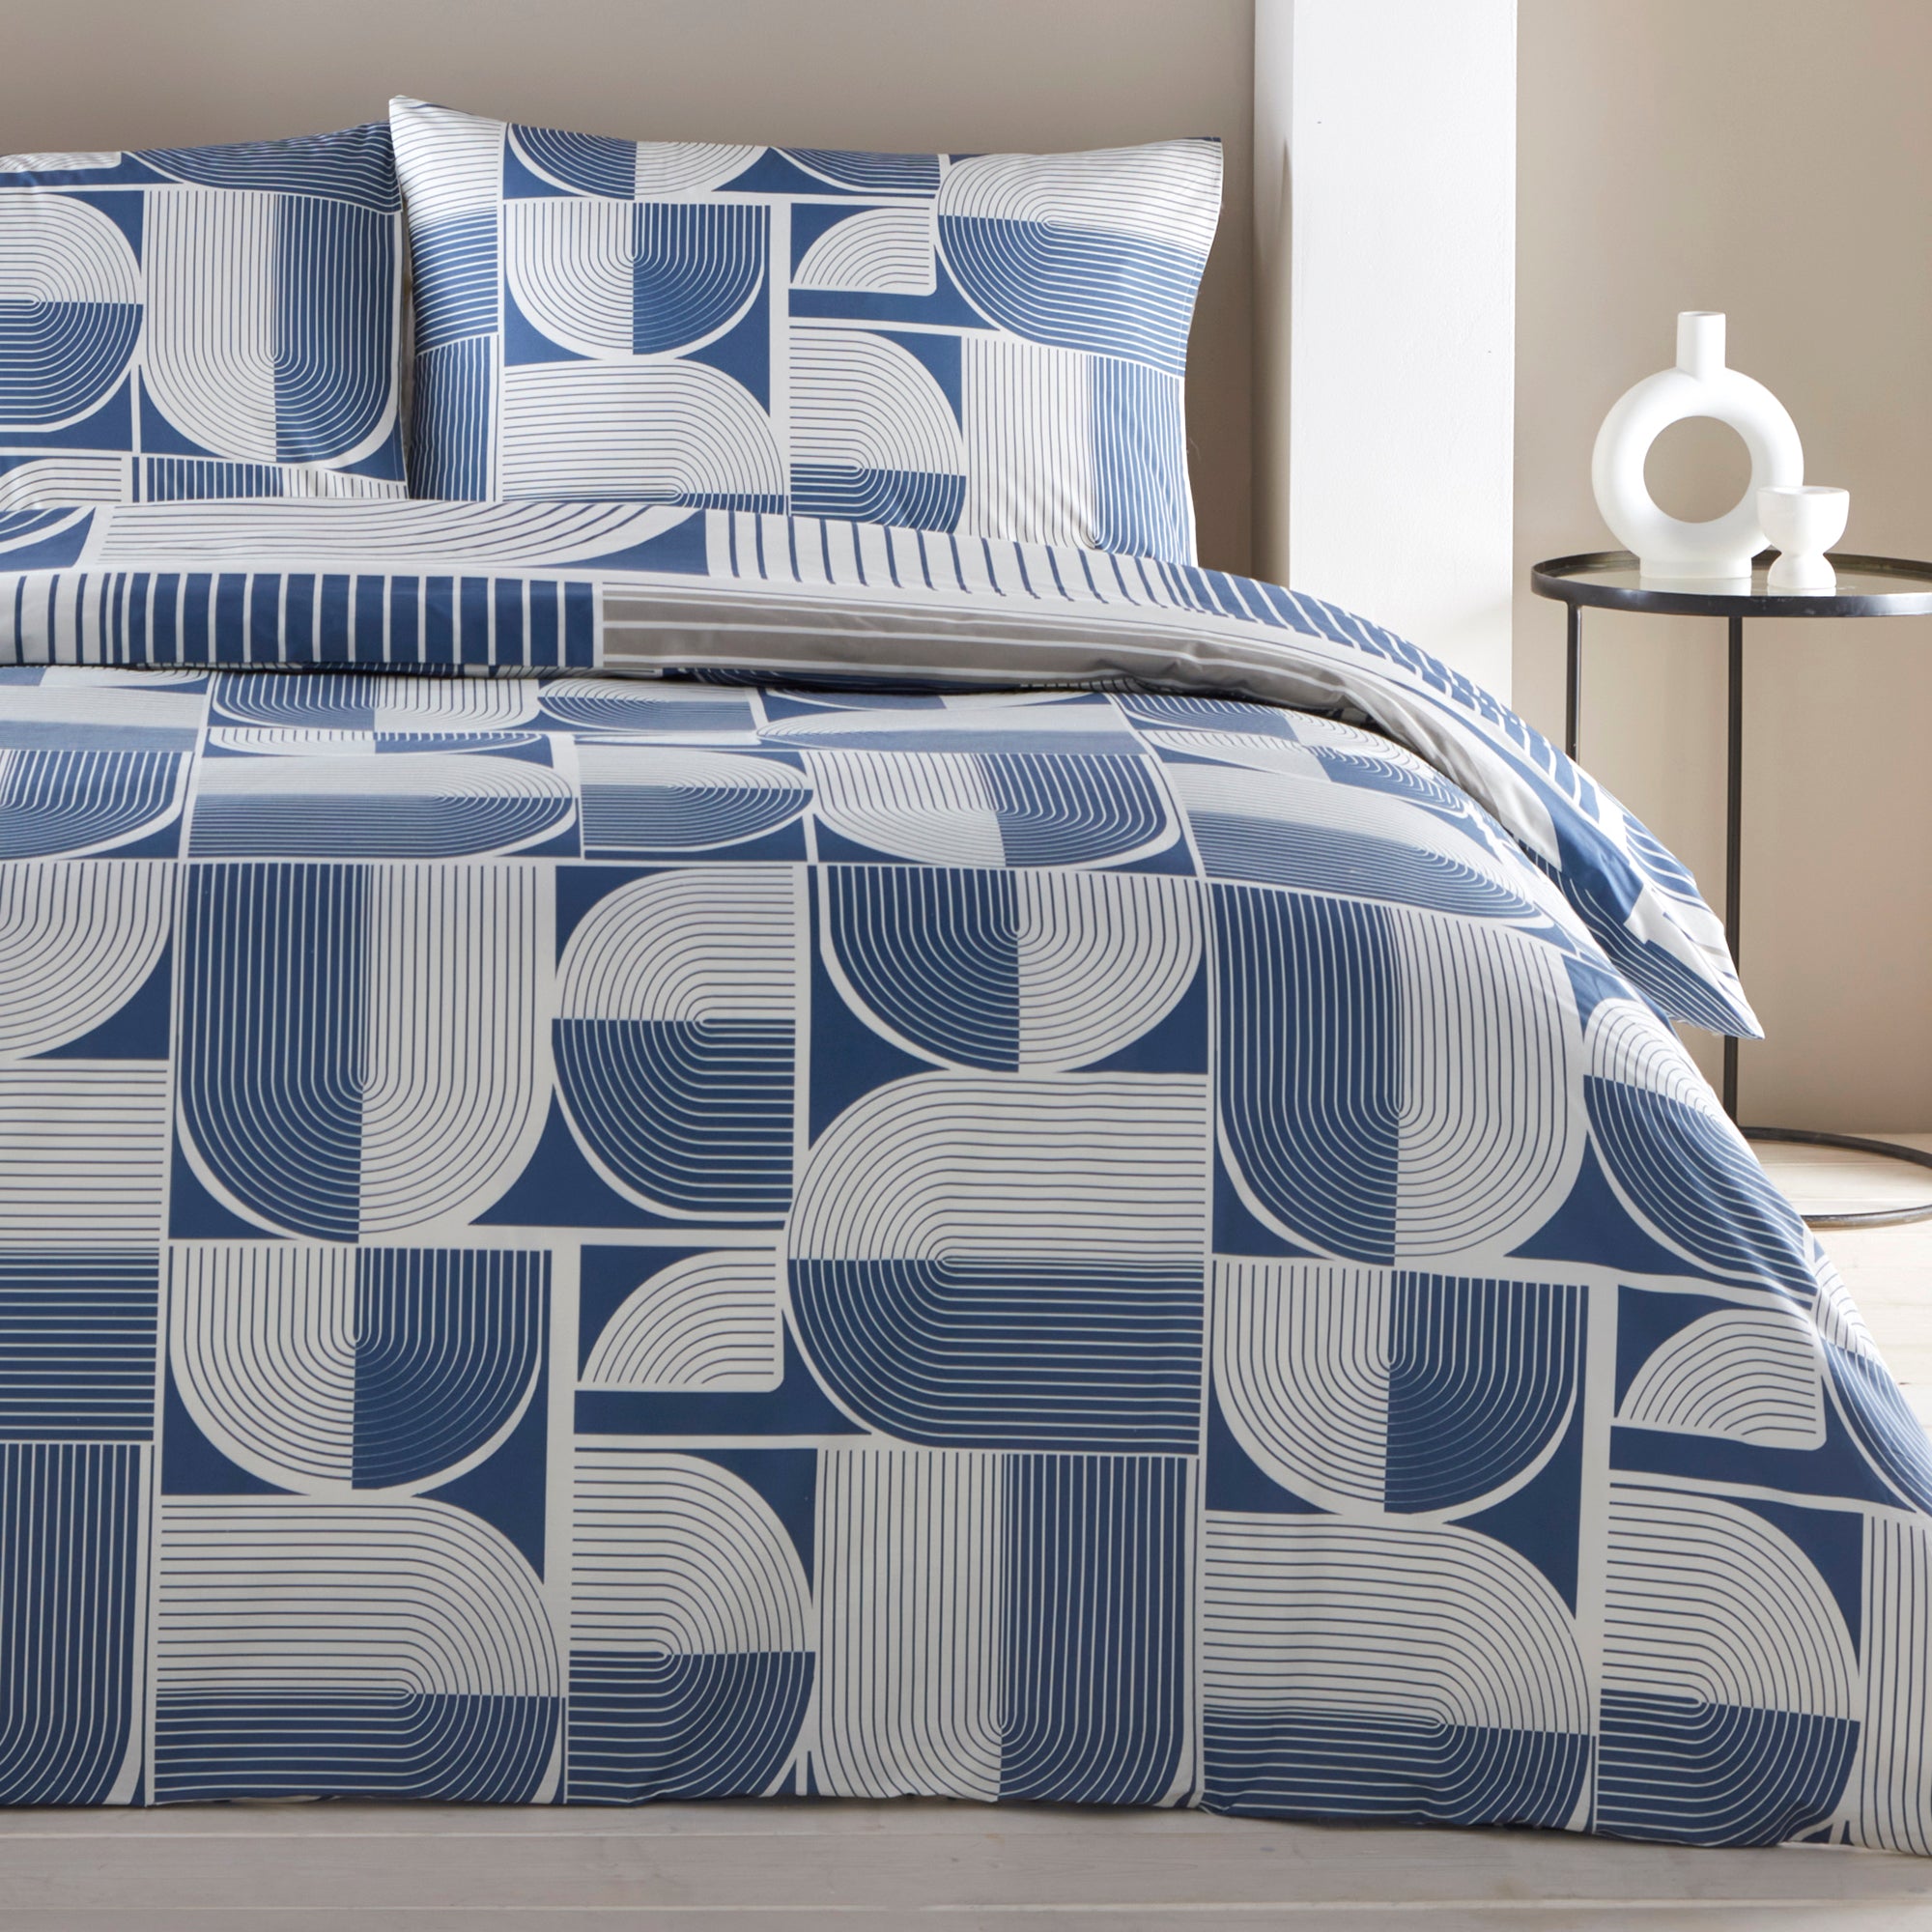 Kali - 100% Cotton Duvet Cover Set in Navy & Grey - by Appletree Style